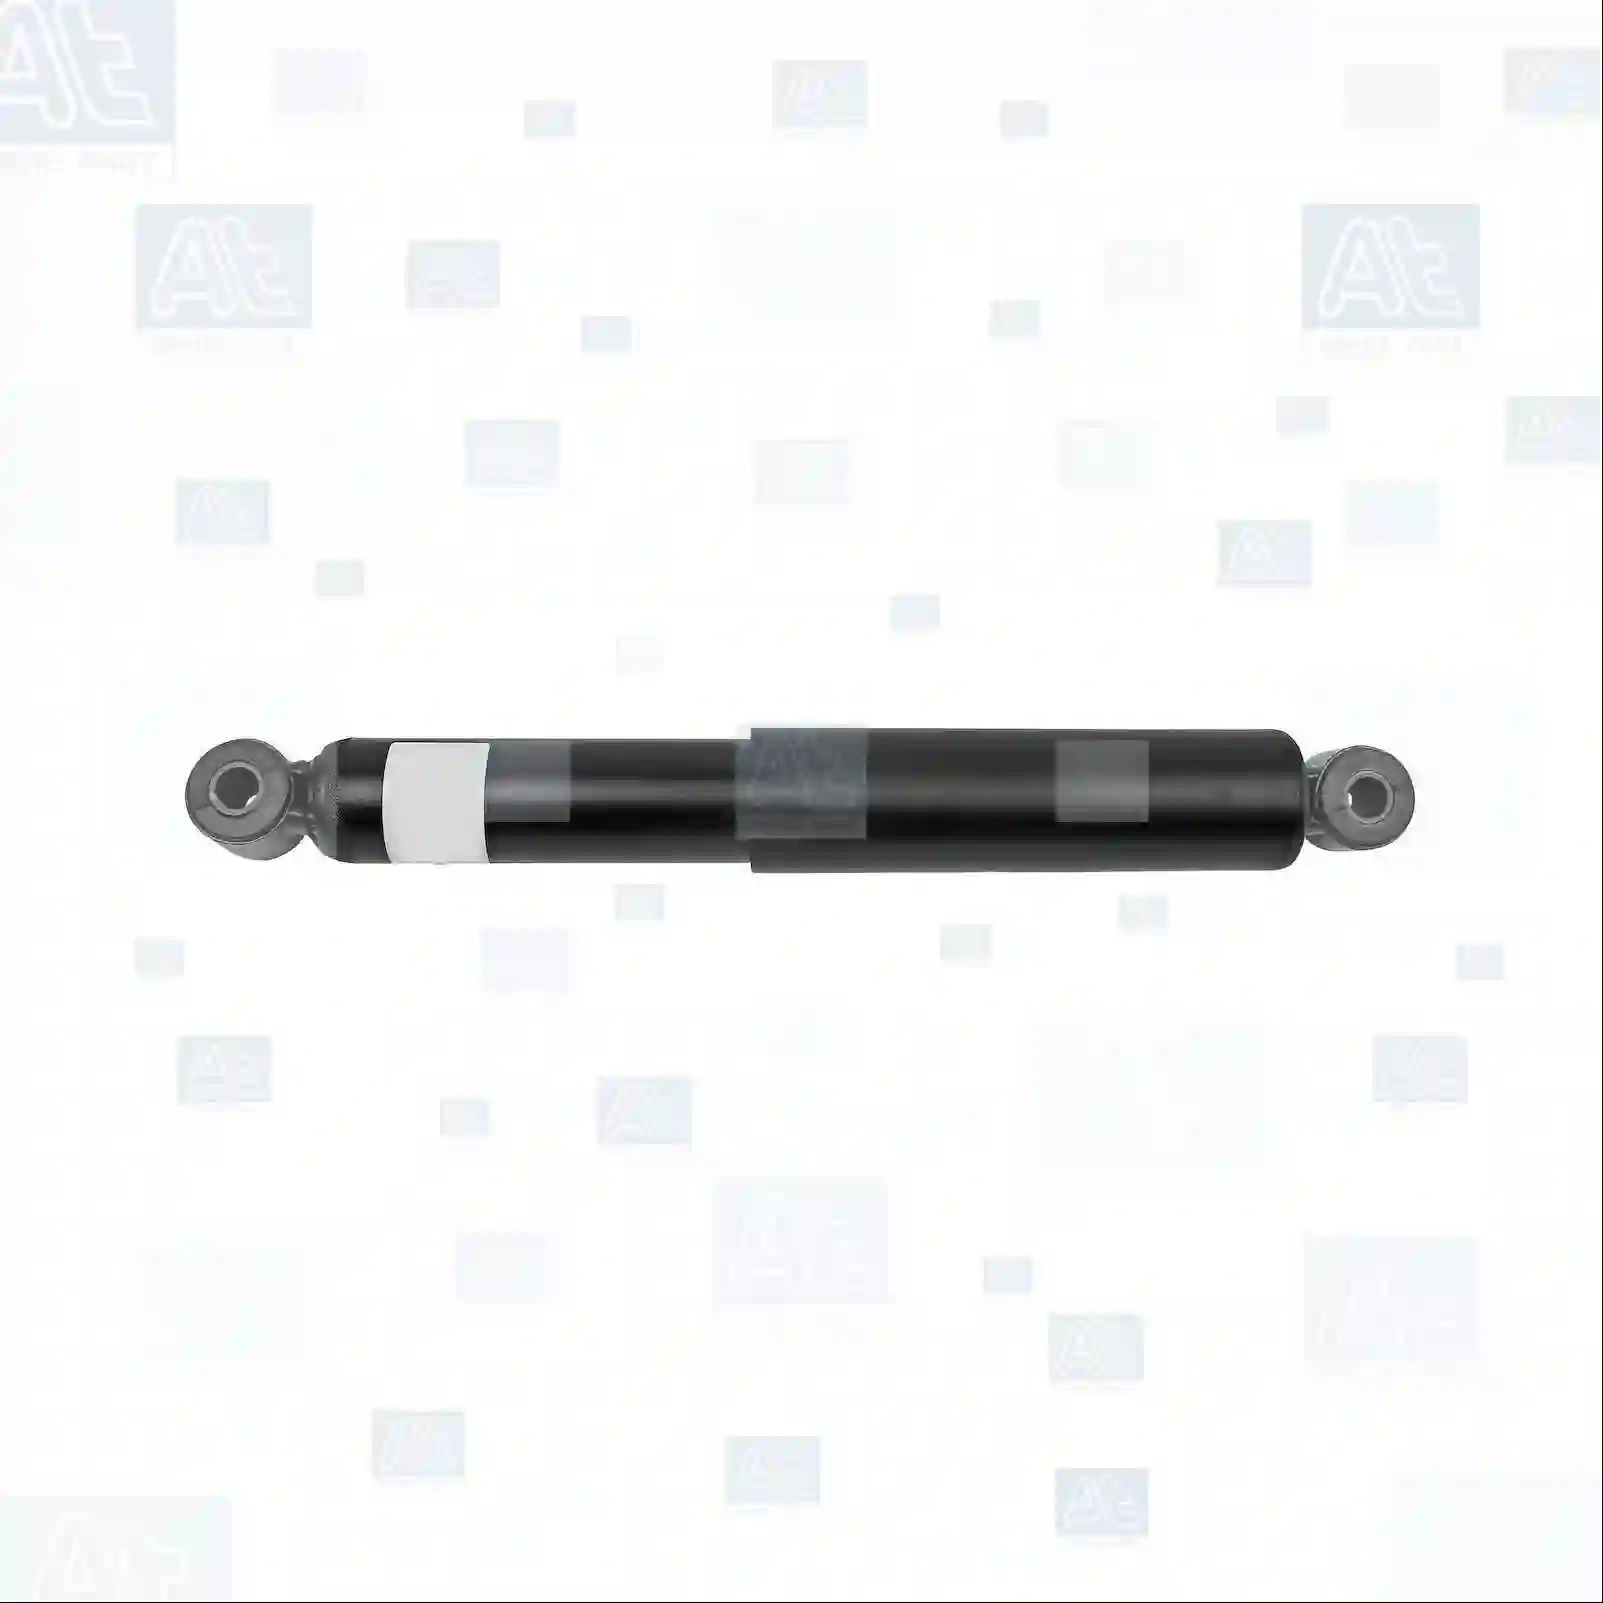 Shock absorber, at no 77728106, oem no: 04726933, 04750776, 04829308, 04829310, 08563333, 08565060, 08566311, 08566312, 08568999, 08569000, 04750776, 08563333, 08566312, 04726933, 04750776, 04817912, 04829308, 04829310, 08555803, 08559478, 08559985, 08561470, 08562478, 08563236, 08563333, 08565060, 08566311, 08566312, 08568999, 08569000, 08585538, 4726933, 4750776, 4829308, 4829310, 8563333, 8566311, 8566312, 8568999, 8569000 At Spare Part | Engine, Accelerator Pedal, Camshaft, Connecting Rod, Crankcase, Crankshaft, Cylinder Head, Engine Suspension Mountings, Exhaust Manifold, Exhaust Gas Recirculation, Filter Kits, Flywheel Housing, General Overhaul Kits, Engine, Intake Manifold, Oil Cleaner, Oil Cooler, Oil Filter, Oil Pump, Oil Sump, Piston & Liner, Sensor & Switch, Timing Case, Turbocharger, Cooling System, Belt Tensioner, Coolant Filter, Coolant Pipe, Corrosion Prevention Agent, Drive, Expansion Tank, Fan, Intercooler, Monitors & Gauges, Radiator, Thermostat, V-Belt / Timing belt, Water Pump, Fuel System, Electronical Injector Unit, Feed Pump, Fuel Filter, cpl., Fuel Gauge Sender,  Fuel Line, Fuel Pump, Fuel Tank, Injection Line Kit, Injection Pump, Exhaust System, Clutch & Pedal, Gearbox, Propeller Shaft, Axles, Brake System, Hubs & Wheels, Suspension, Leaf Spring, Universal Parts / Accessories, Steering, Electrical System, Cabin Shock absorber, at no 77728106, oem no: 04726933, 04750776, 04829308, 04829310, 08563333, 08565060, 08566311, 08566312, 08568999, 08569000, 04750776, 08563333, 08566312, 04726933, 04750776, 04817912, 04829308, 04829310, 08555803, 08559478, 08559985, 08561470, 08562478, 08563236, 08563333, 08565060, 08566311, 08566312, 08568999, 08569000, 08585538, 4726933, 4750776, 4829308, 4829310, 8563333, 8566311, 8566312, 8568999, 8569000 At Spare Part | Engine, Accelerator Pedal, Camshaft, Connecting Rod, Crankcase, Crankshaft, Cylinder Head, Engine Suspension Mountings, Exhaust Manifold, Exhaust Gas Recirculation, Filter Kits, Flywheel Housing, General Overhaul Kits, Engine, Intake Manifold, Oil Cleaner, Oil Cooler, Oil Filter, Oil Pump, Oil Sump, Piston & Liner, Sensor & Switch, Timing Case, Turbocharger, Cooling System, Belt Tensioner, Coolant Filter, Coolant Pipe, Corrosion Prevention Agent, Drive, Expansion Tank, Fan, Intercooler, Monitors & Gauges, Radiator, Thermostat, V-Belt / Timing belt, Water Pump, Fuel System, Electronical Injector Unit, Feed Pump, Fuel Filter, cpl., Fuel Gauge Sender,  Fuel Line, Fuel Pump, Fuel Tank, Injection Line Kit, Injection Pump, Exhaust System, Clutch & Pedal, Gearbox, Propeller Shaft, Axles, Brake System, Hubs & Wheels, Suspension, Leaf Spring, Universal Parts / Accessories, Steering, Electrical System, Cabin